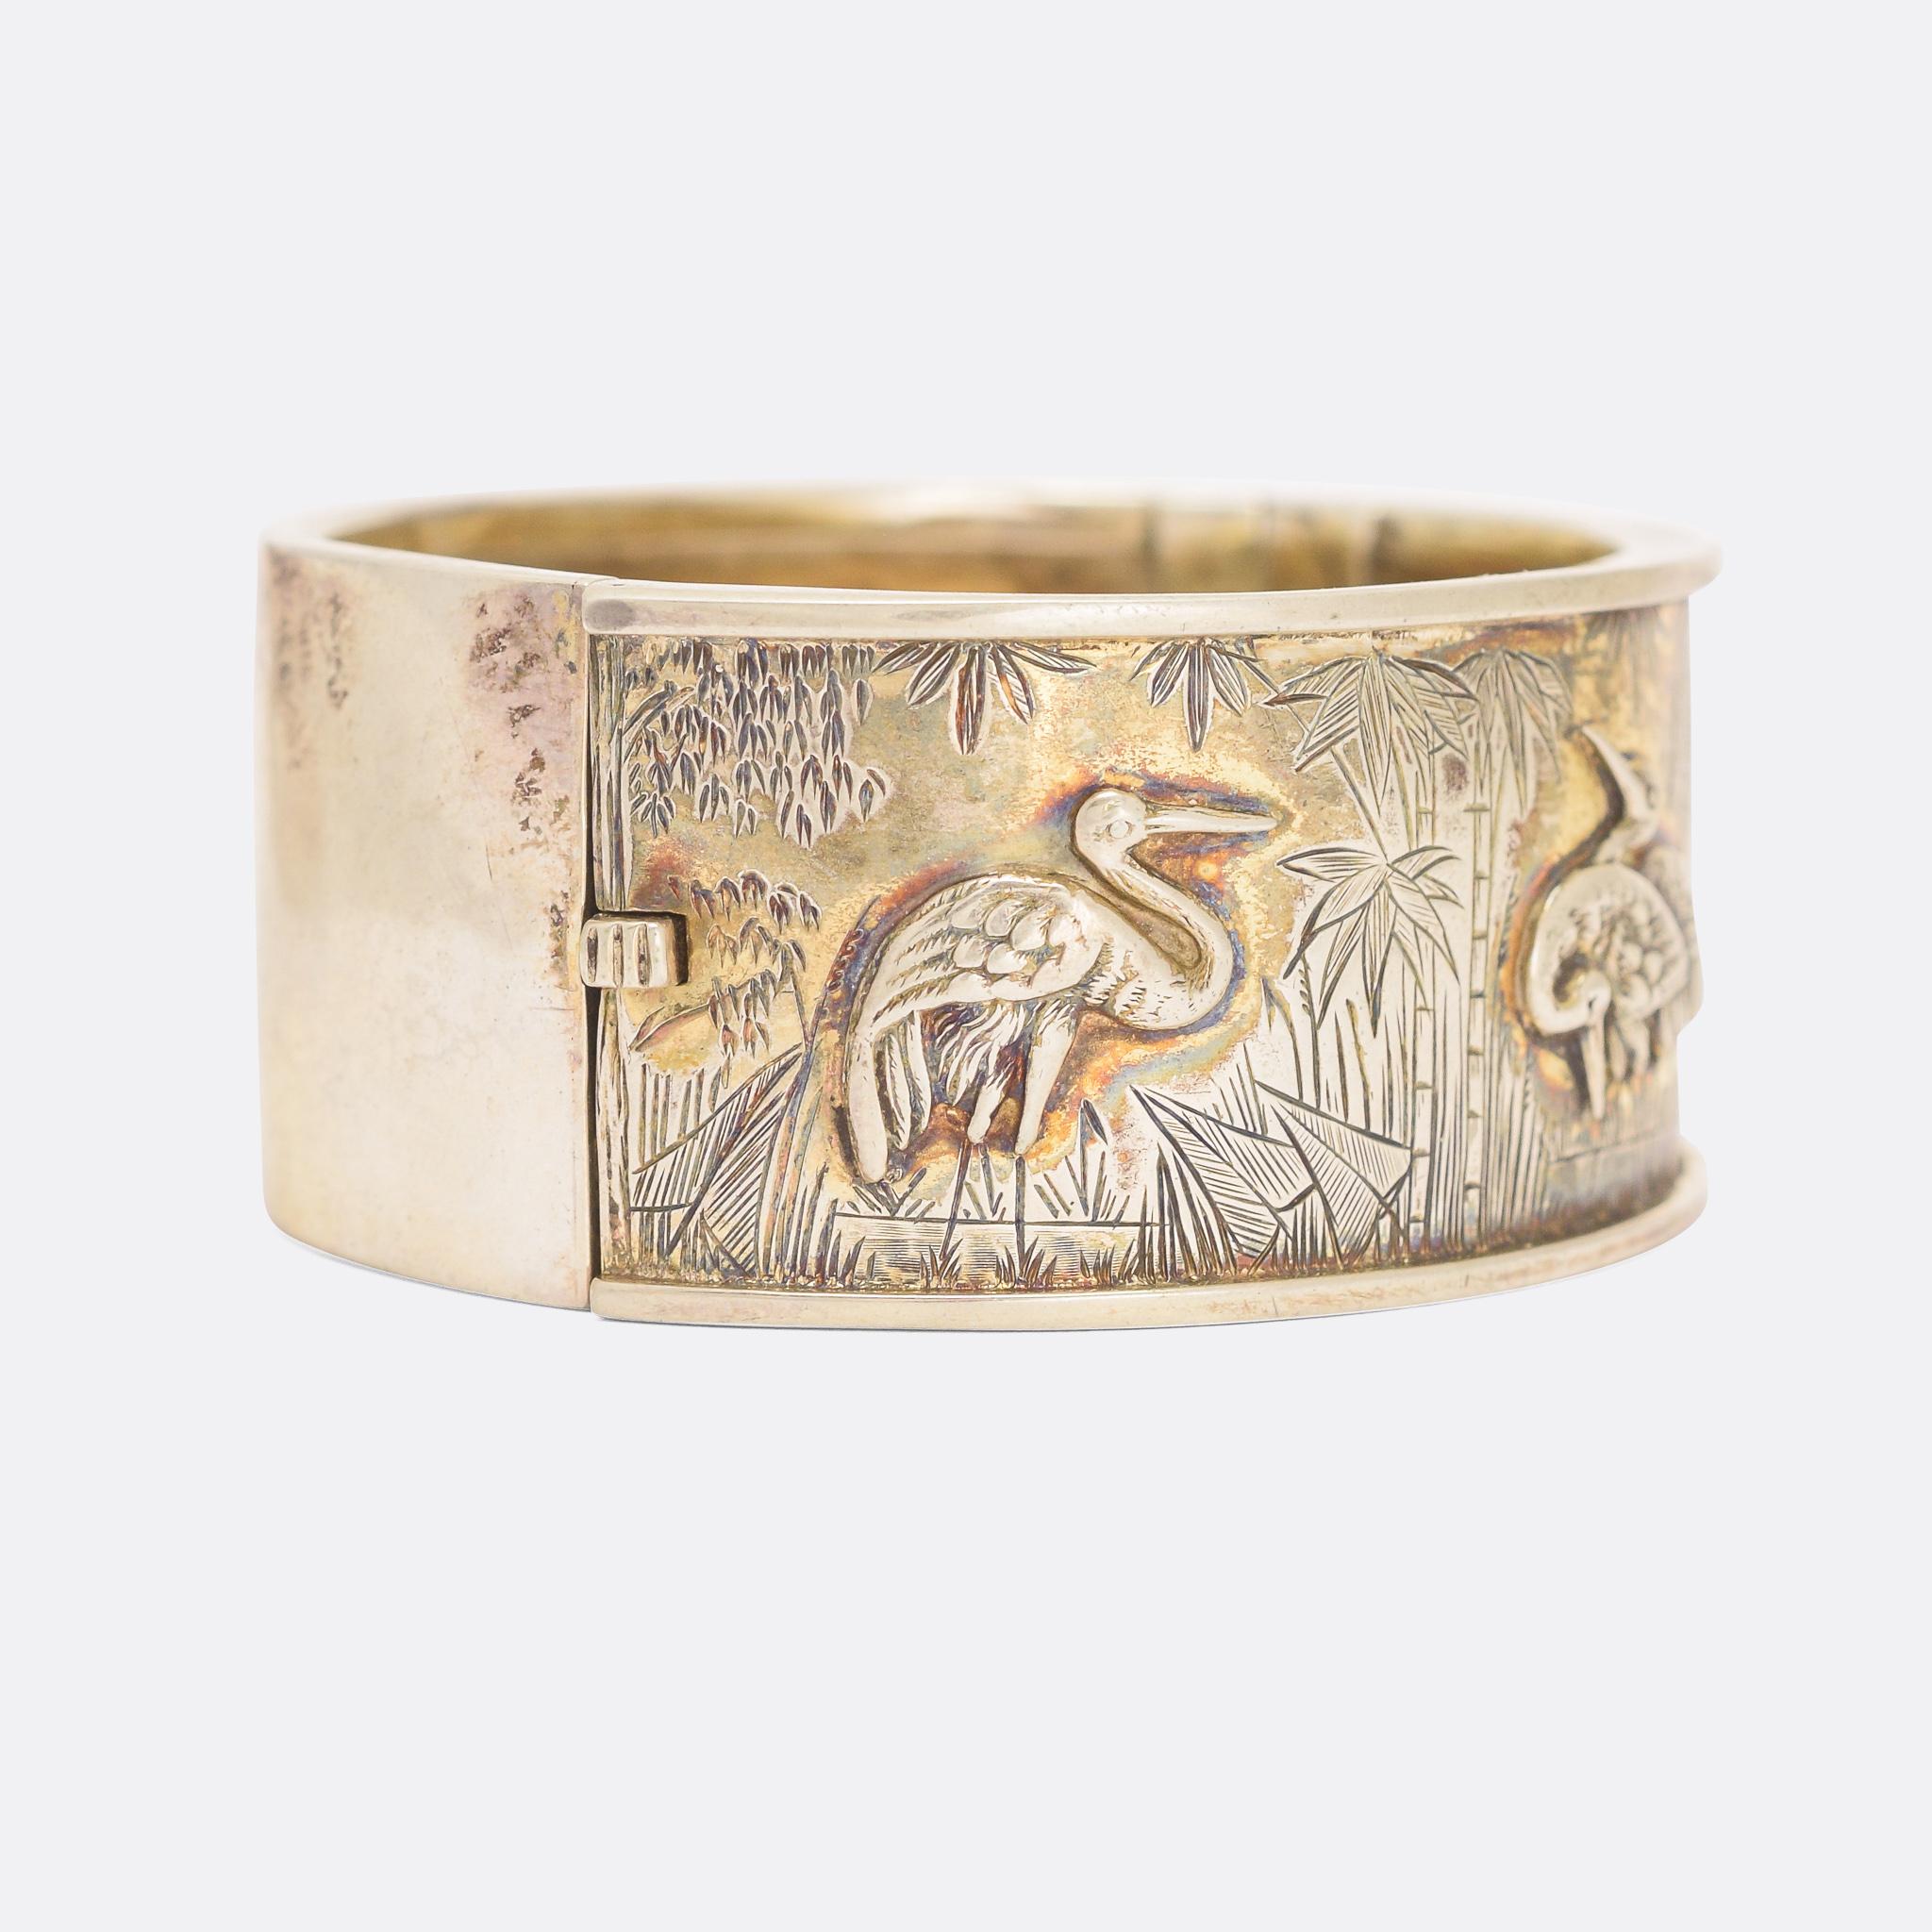 A cool Victorian silver cuff bangle worked in the Aesthetic style with storks and a gorgeous hand-chased jungle backdrop. It's crafted in Sterling silver and dates from the 1880s.

The English Aesthetic Movement was directly inspired by the London